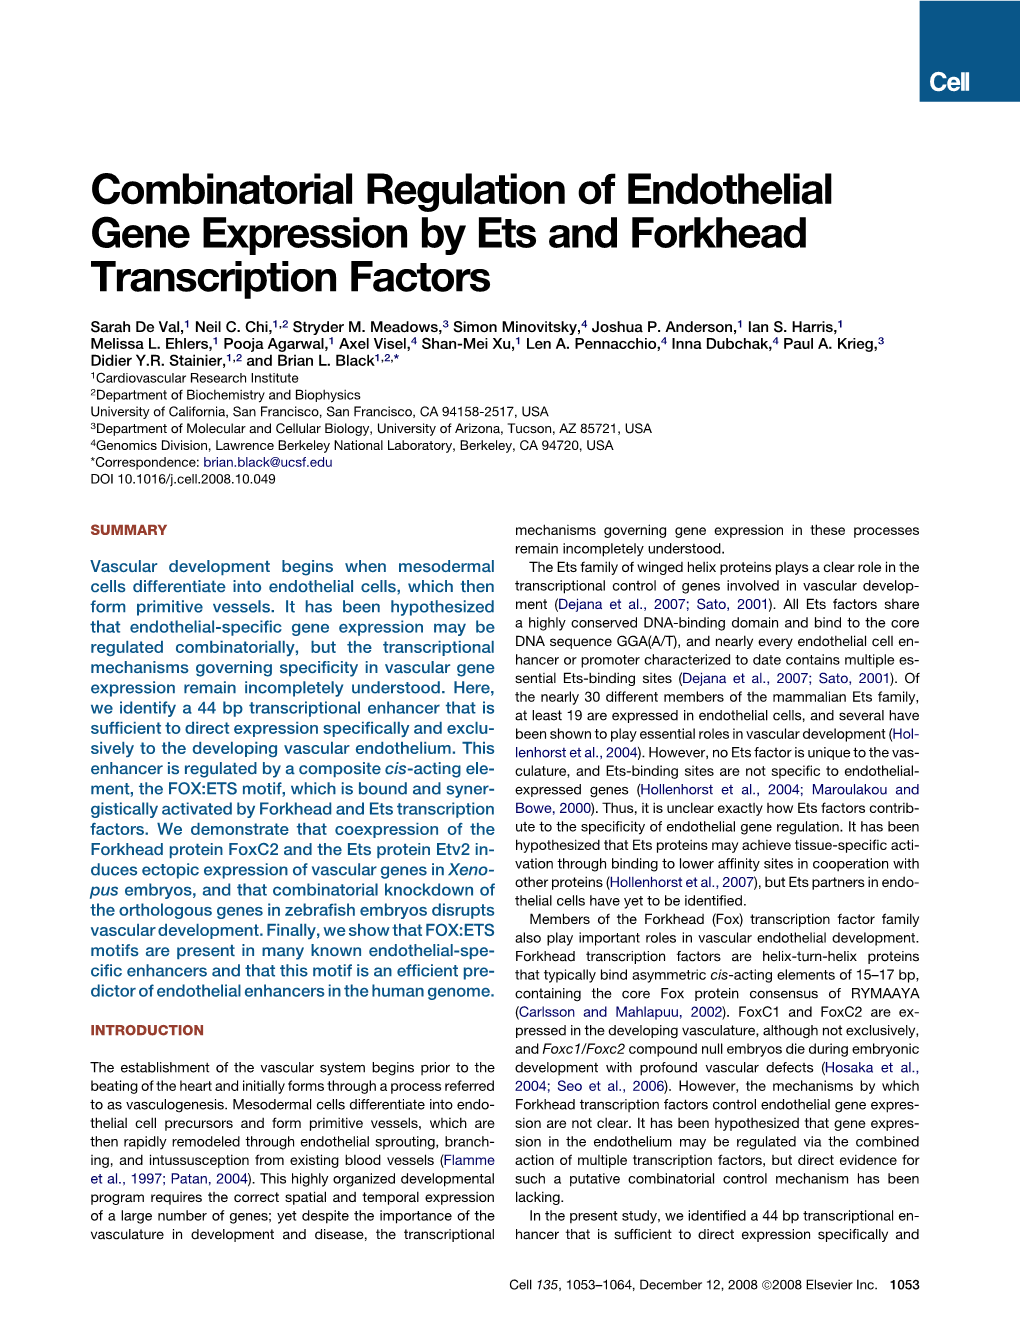 Combinatorial Regulation of Endothelial Gene Expression by Ets and Forkhead Transcription Factors